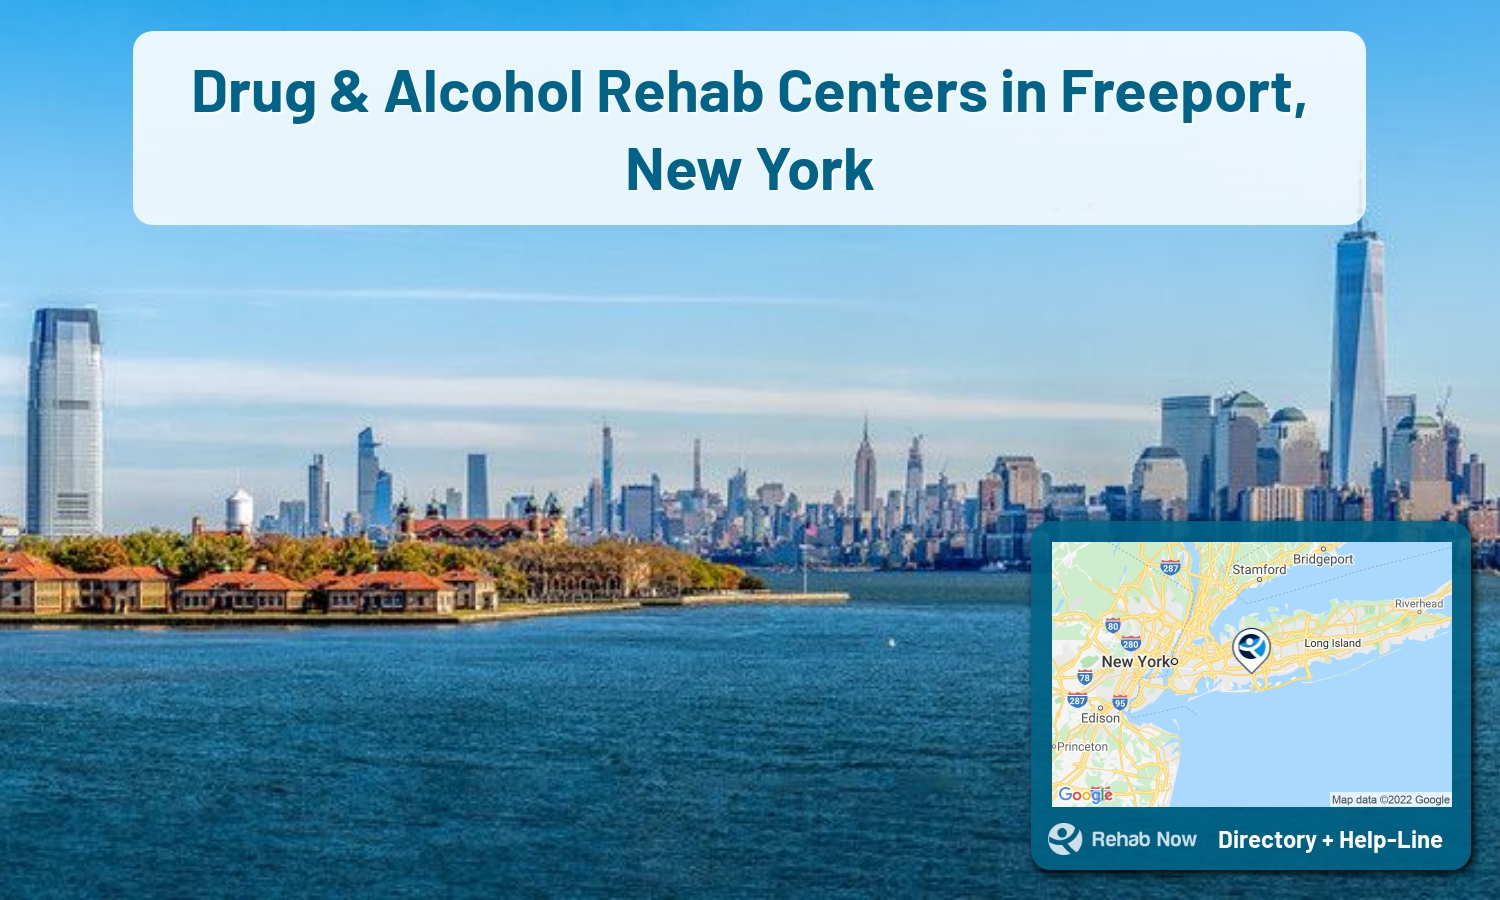 Need treatment nearby in Freeport, New York? Choose a drug/alcohol rehab center from our list, or call our hotline now for free help.